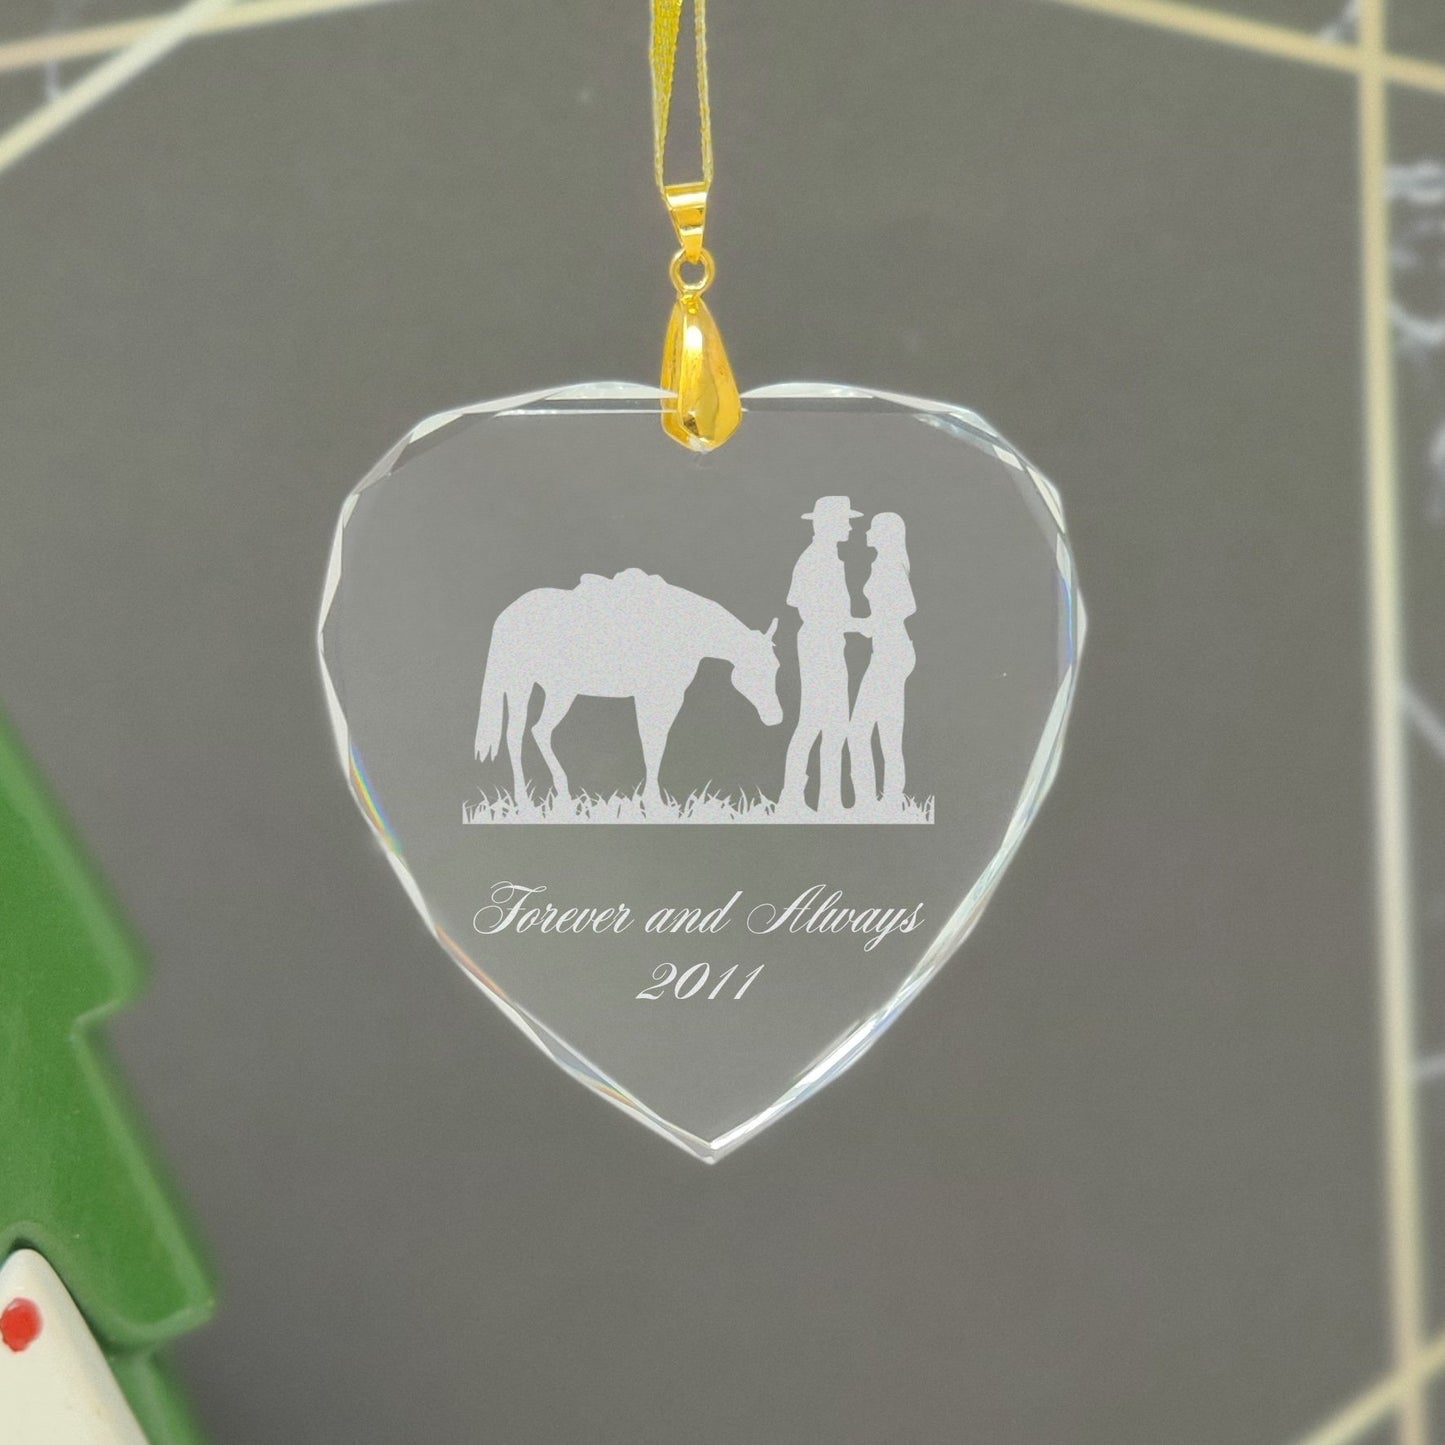 LaserGram Christmas Ornament, Sailboat, Personalized Engraving Included (Heart Shape)